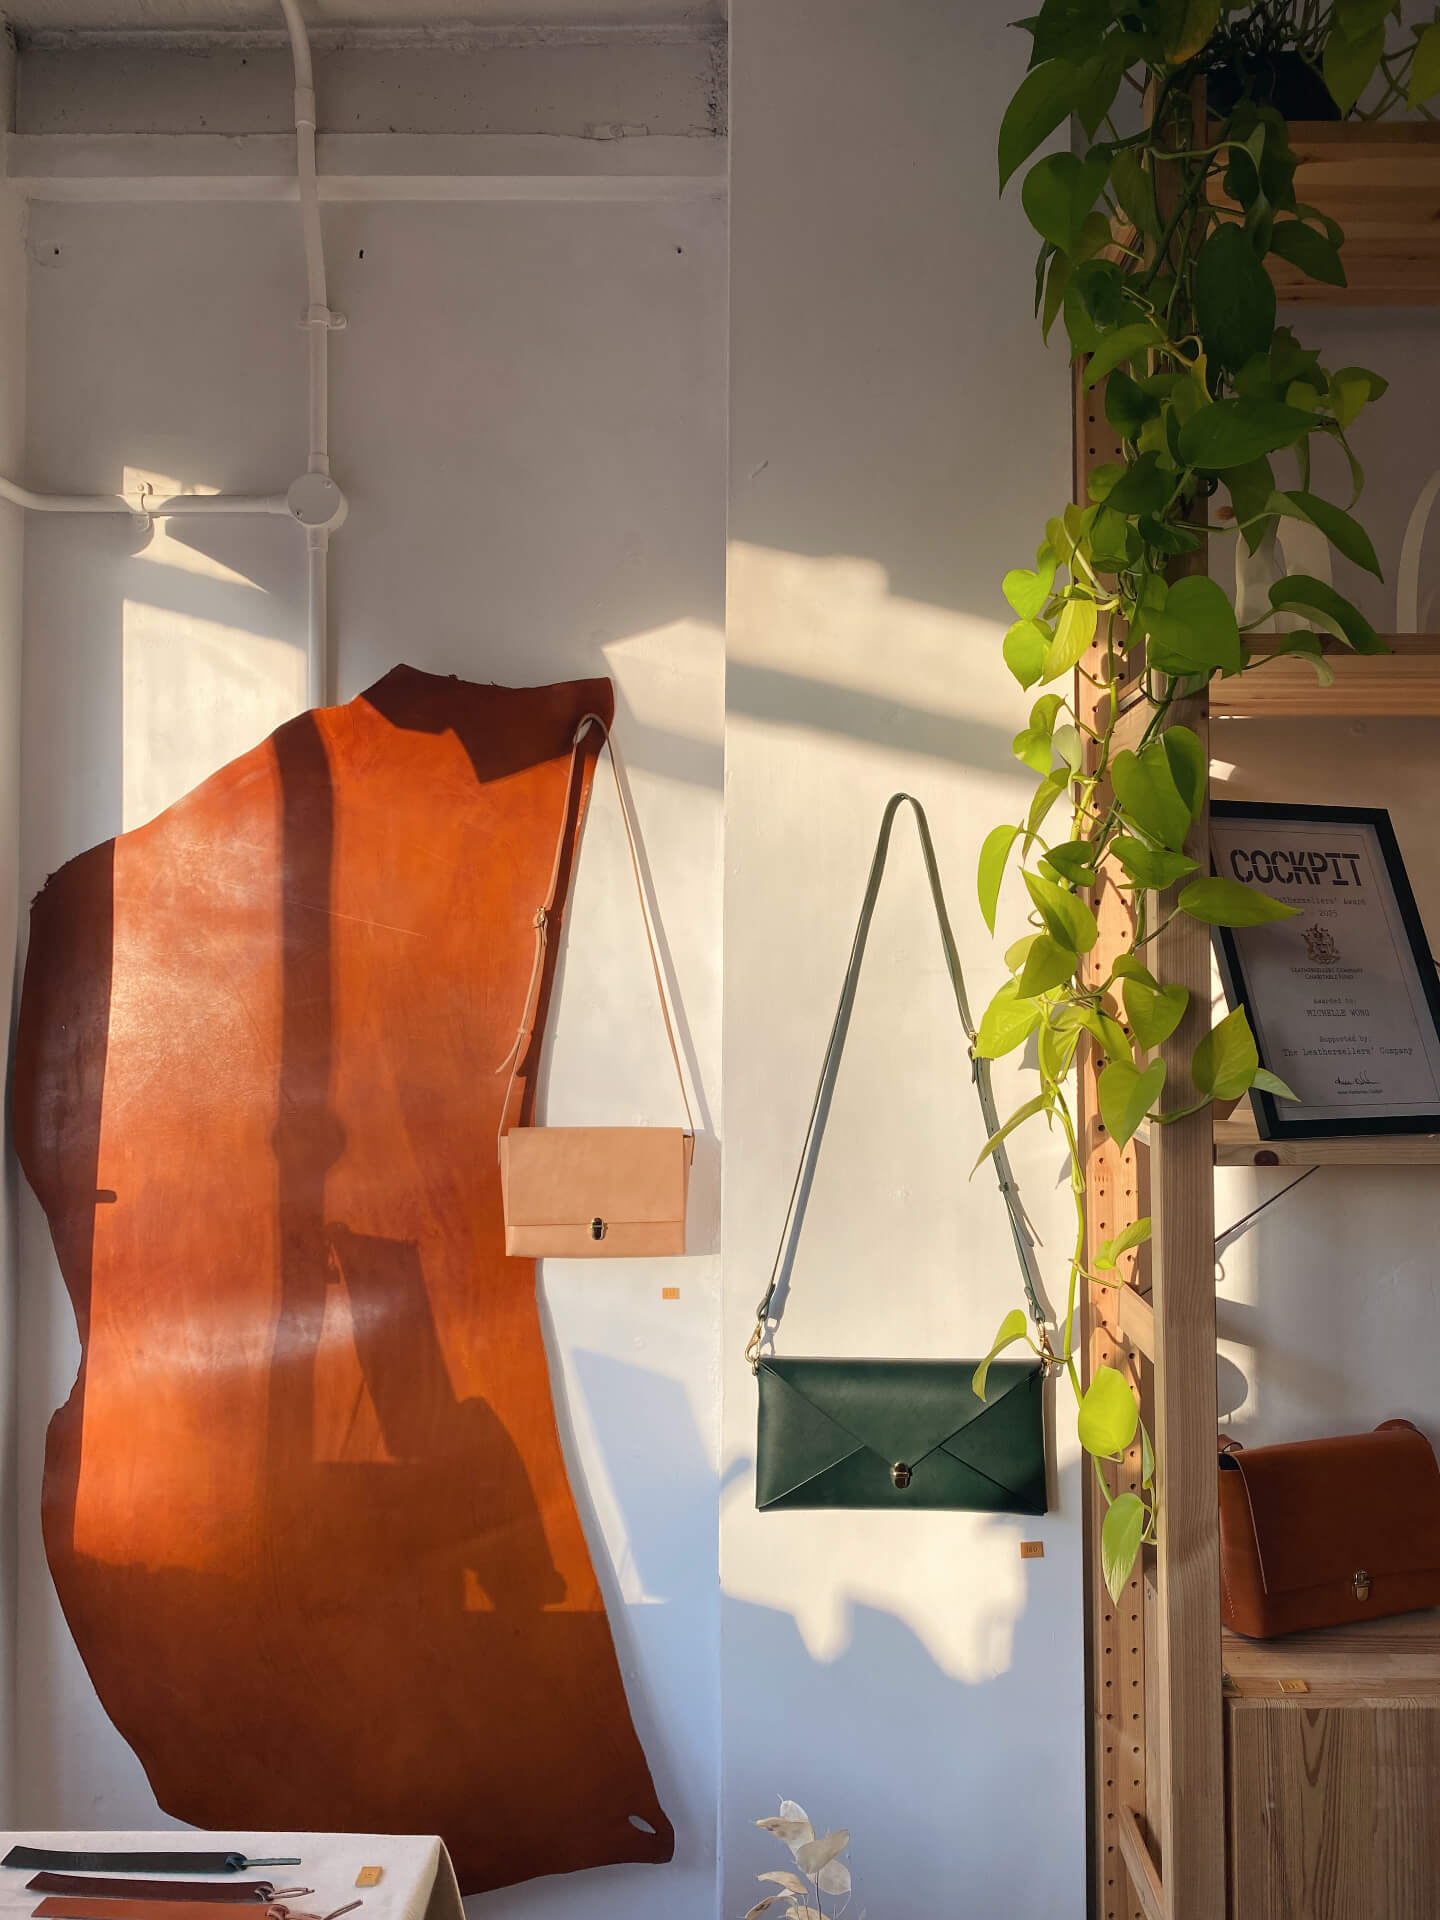 Inside the studio of Michelle Wong handcrafted leather goods